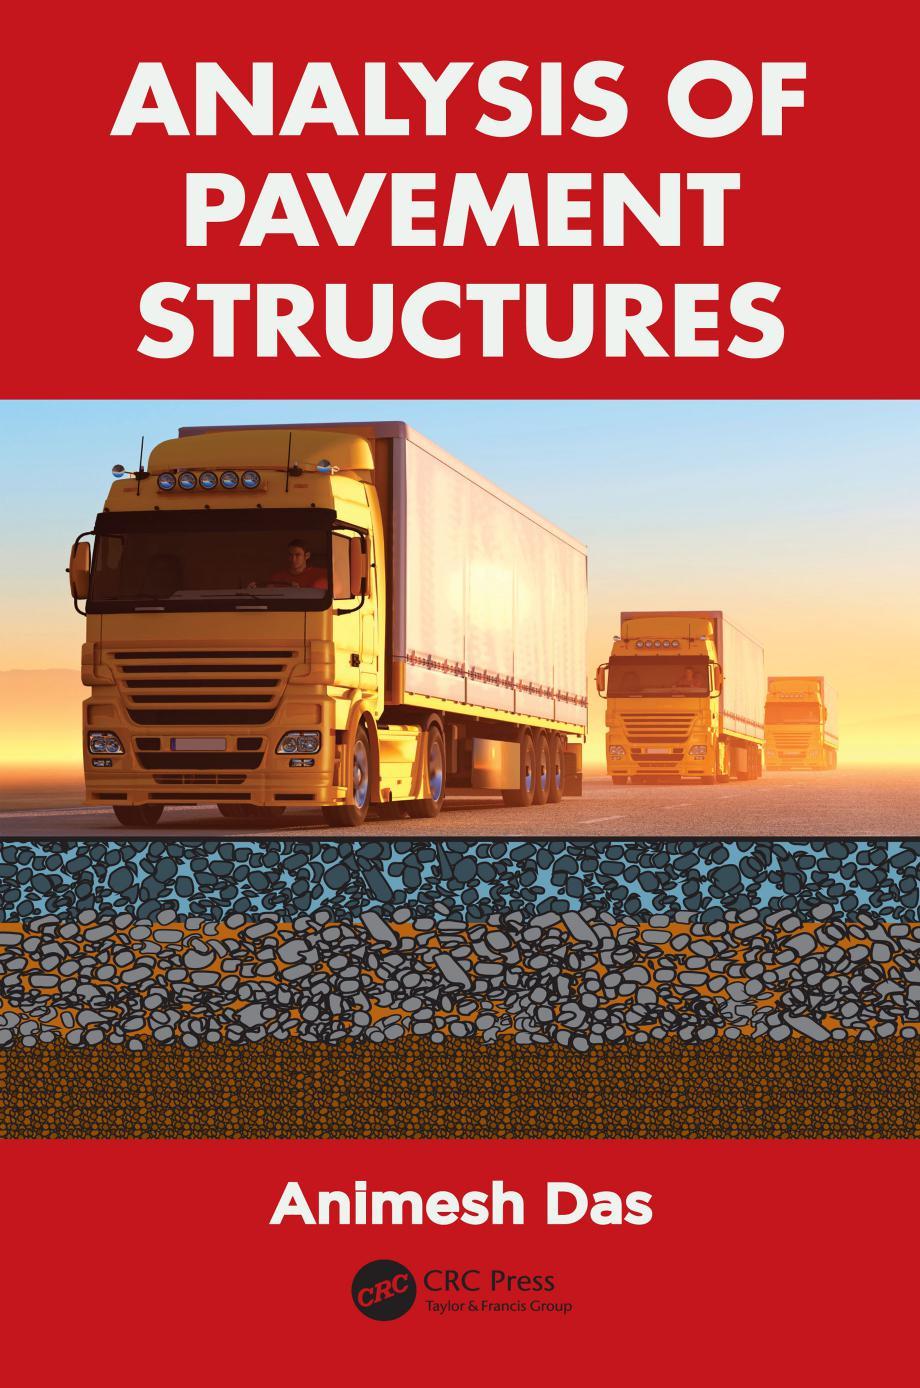 Analysis of Pavement Structures 2015